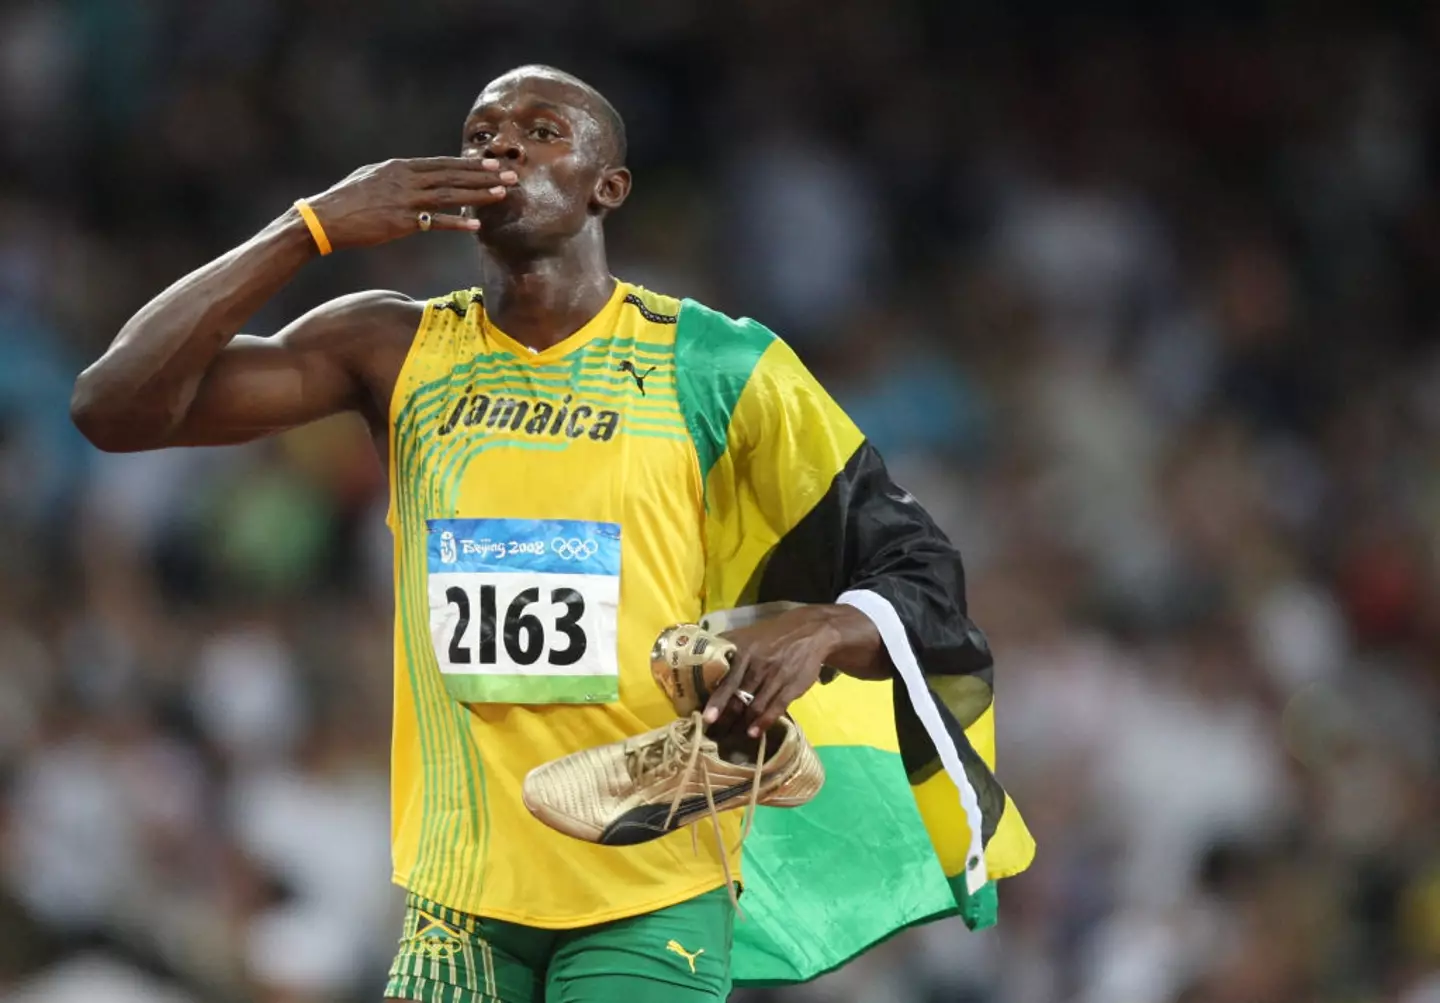 The Jamaican is still the best to ever do it. (VALERY HACHE/AFP via Getty Images)